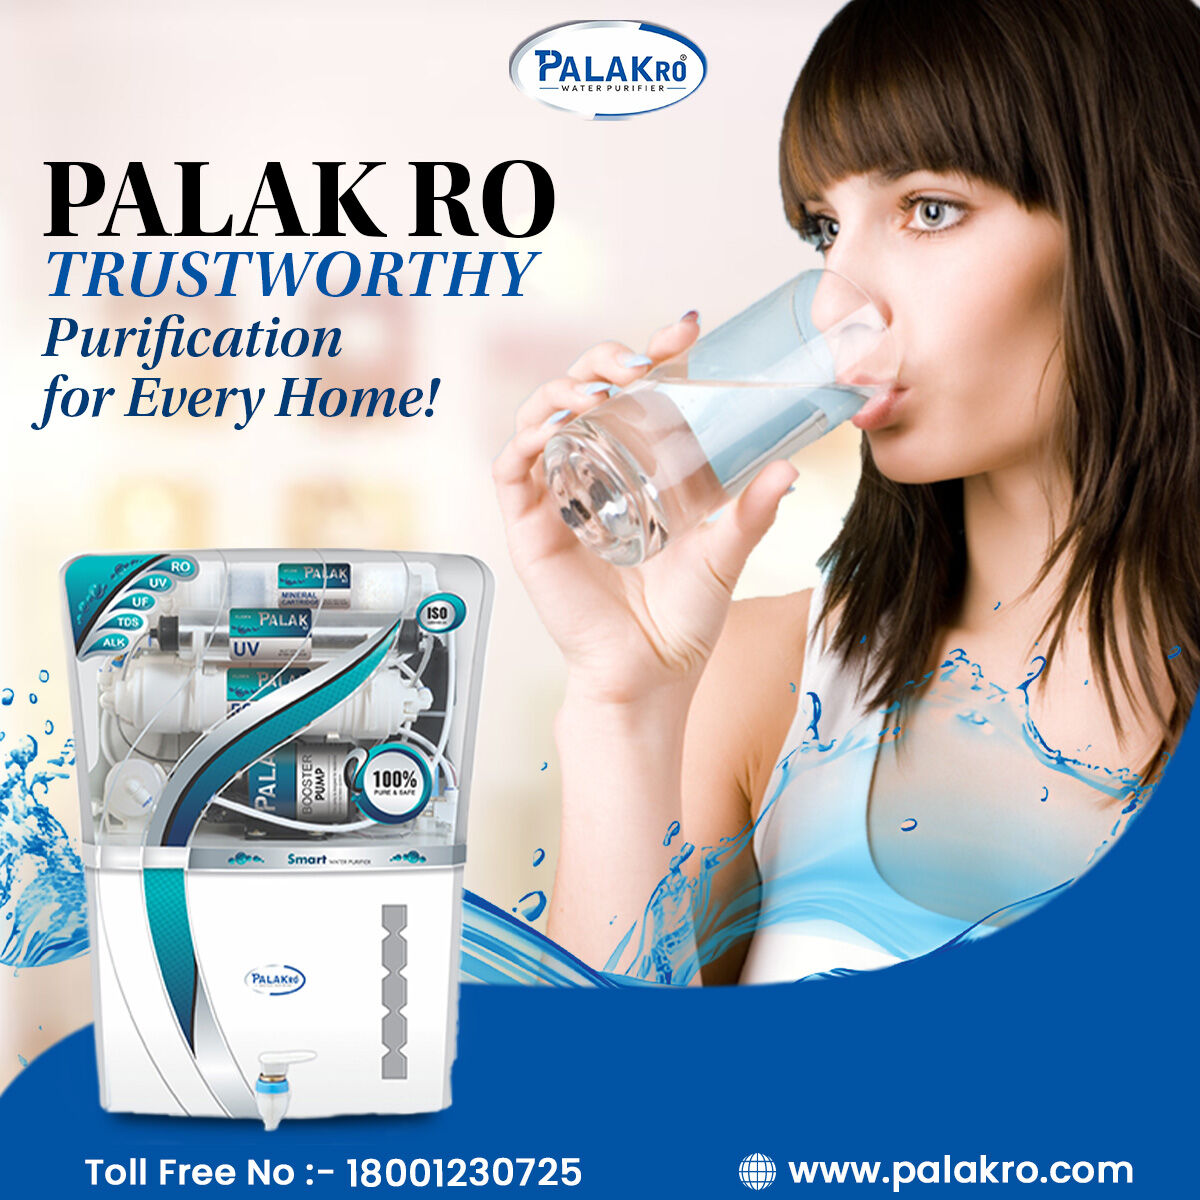 Quench your thirst with the purest sip! 💧💦 
Introducing Palak RO's crystal-clear water, your hydration companion. 🌊🚰🍃
.
What more do you need?
𝐁𝐨𝐨𝐤 𝐲𝐨𝐮𝐫 𝐬𝐞𝐫𝐯𝐢𝐜𝐞 𝐧𝐨𝐰
📞- 98111 39725
🌍- palakro.com
.
.
#PureWater #HydrationStation #DrinkHealthy #